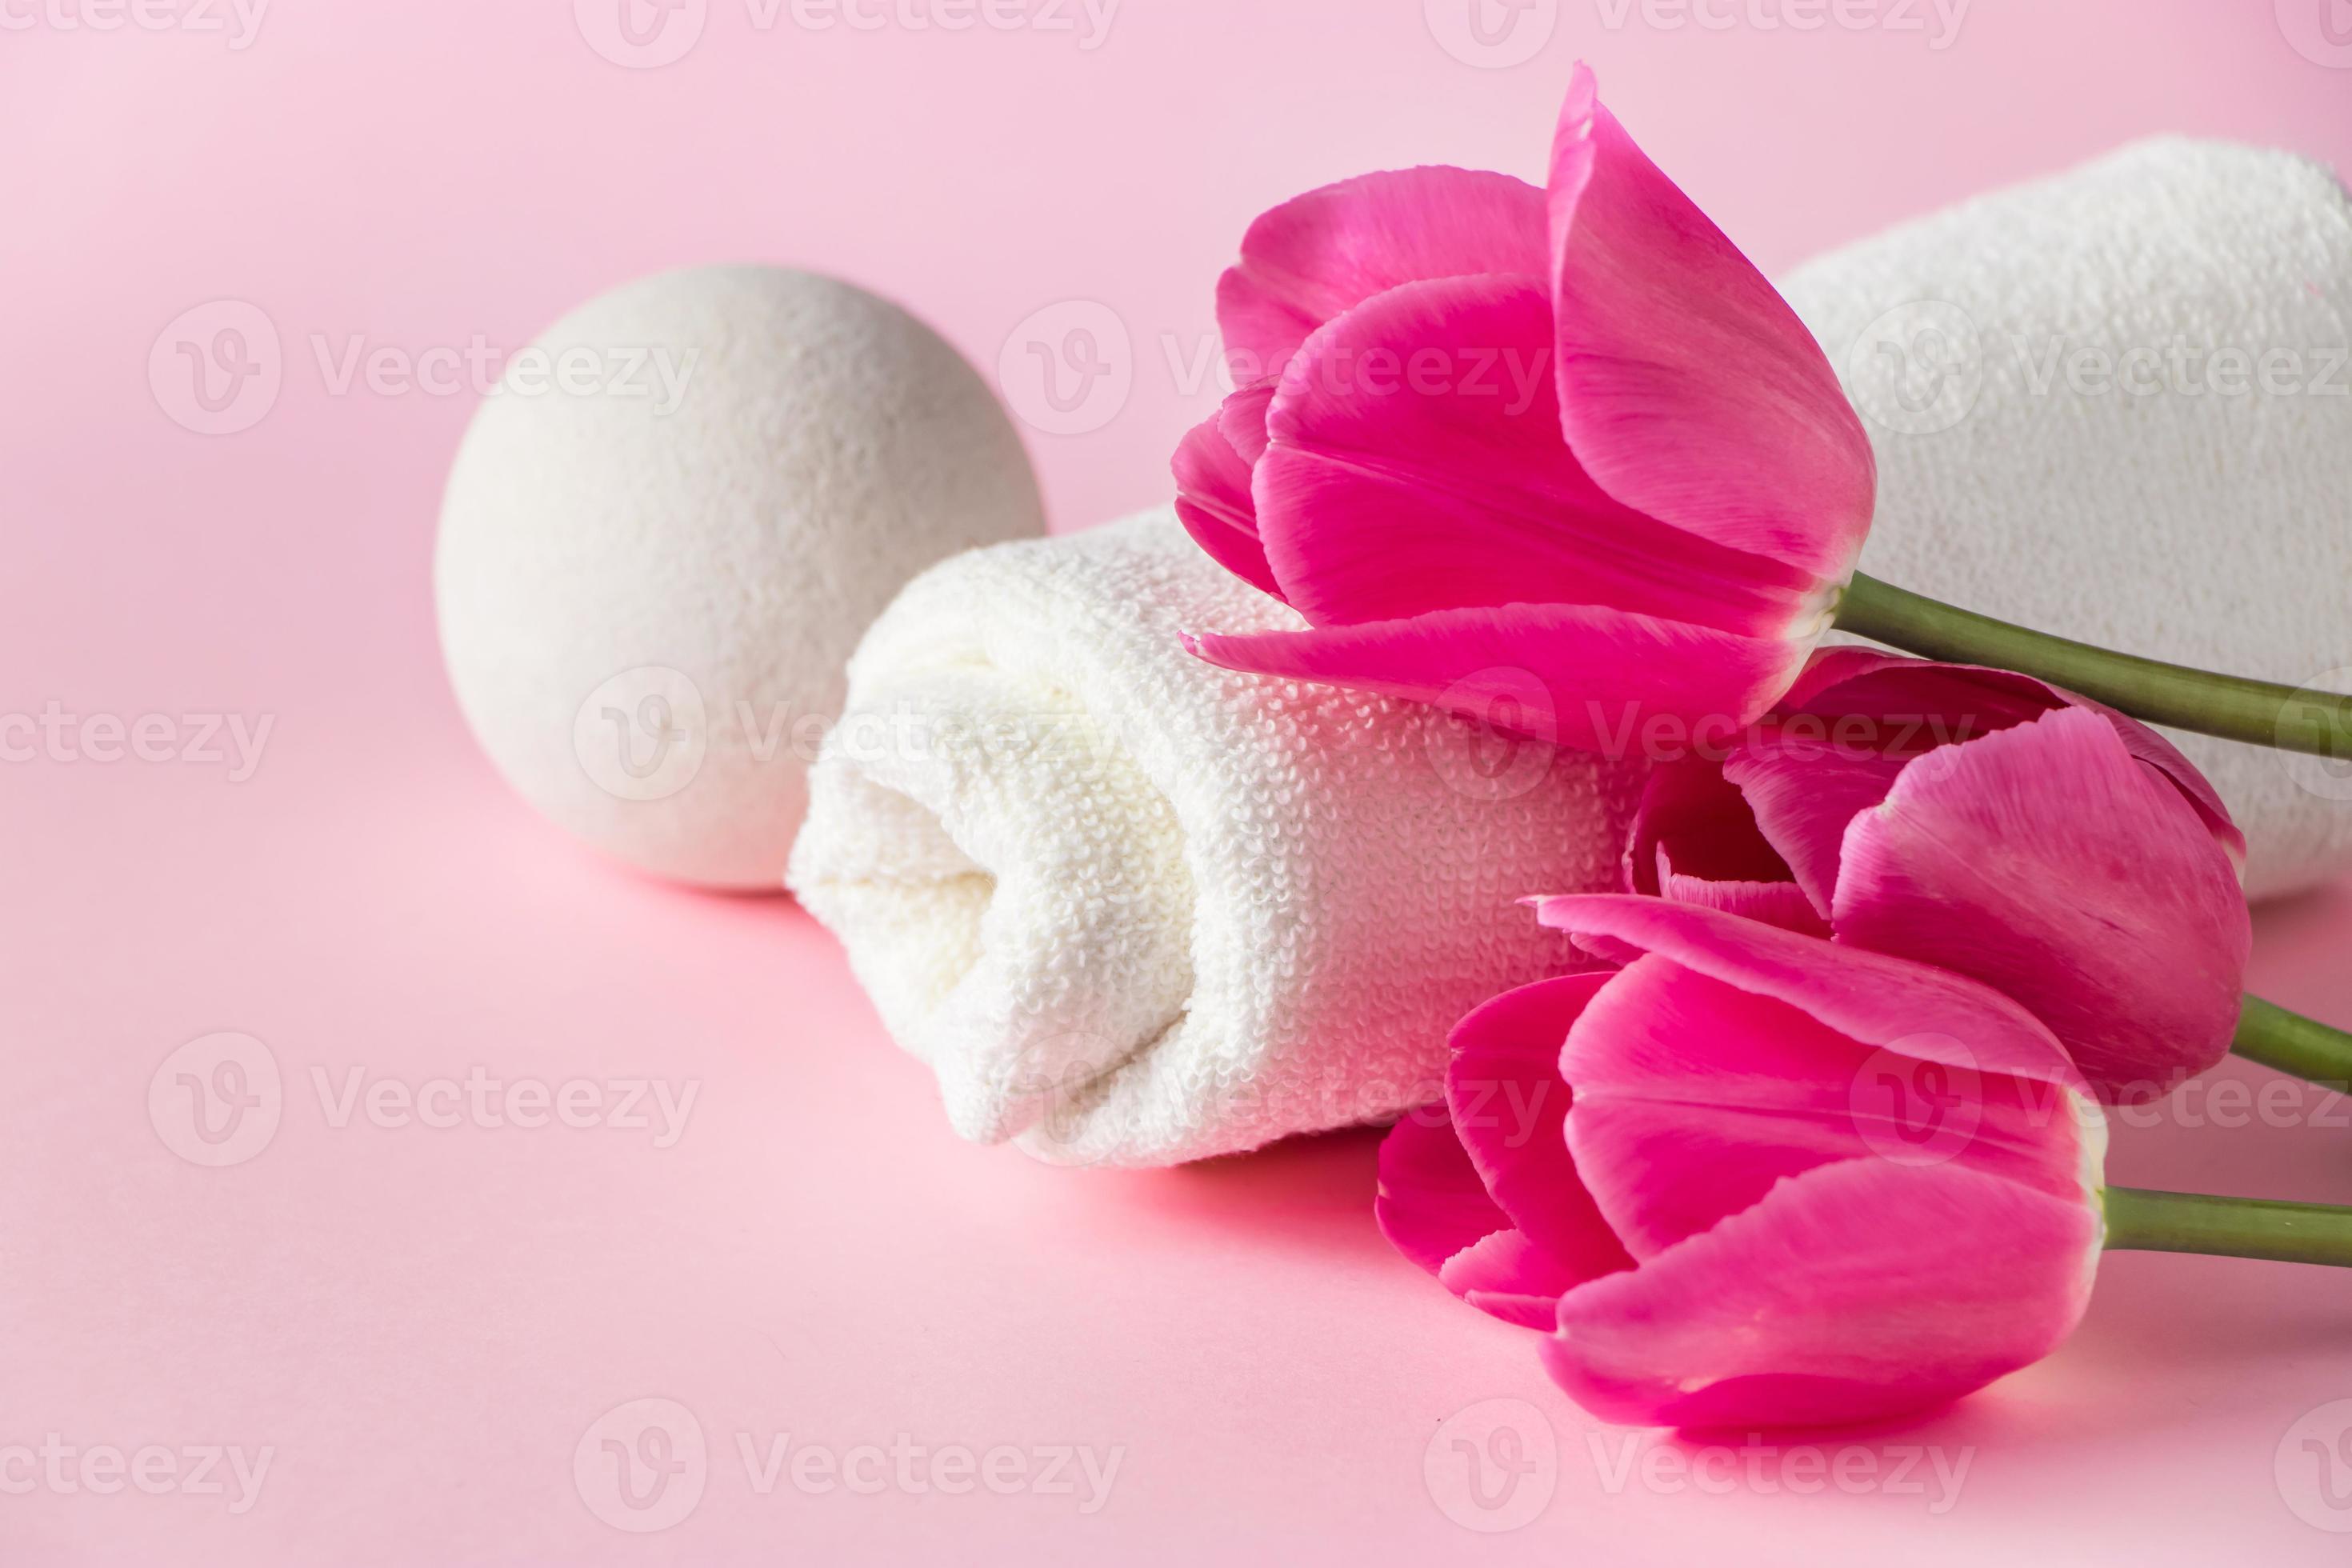 Spa skin care products on a pink background. 4976971 Stock Photo at Vecteezy